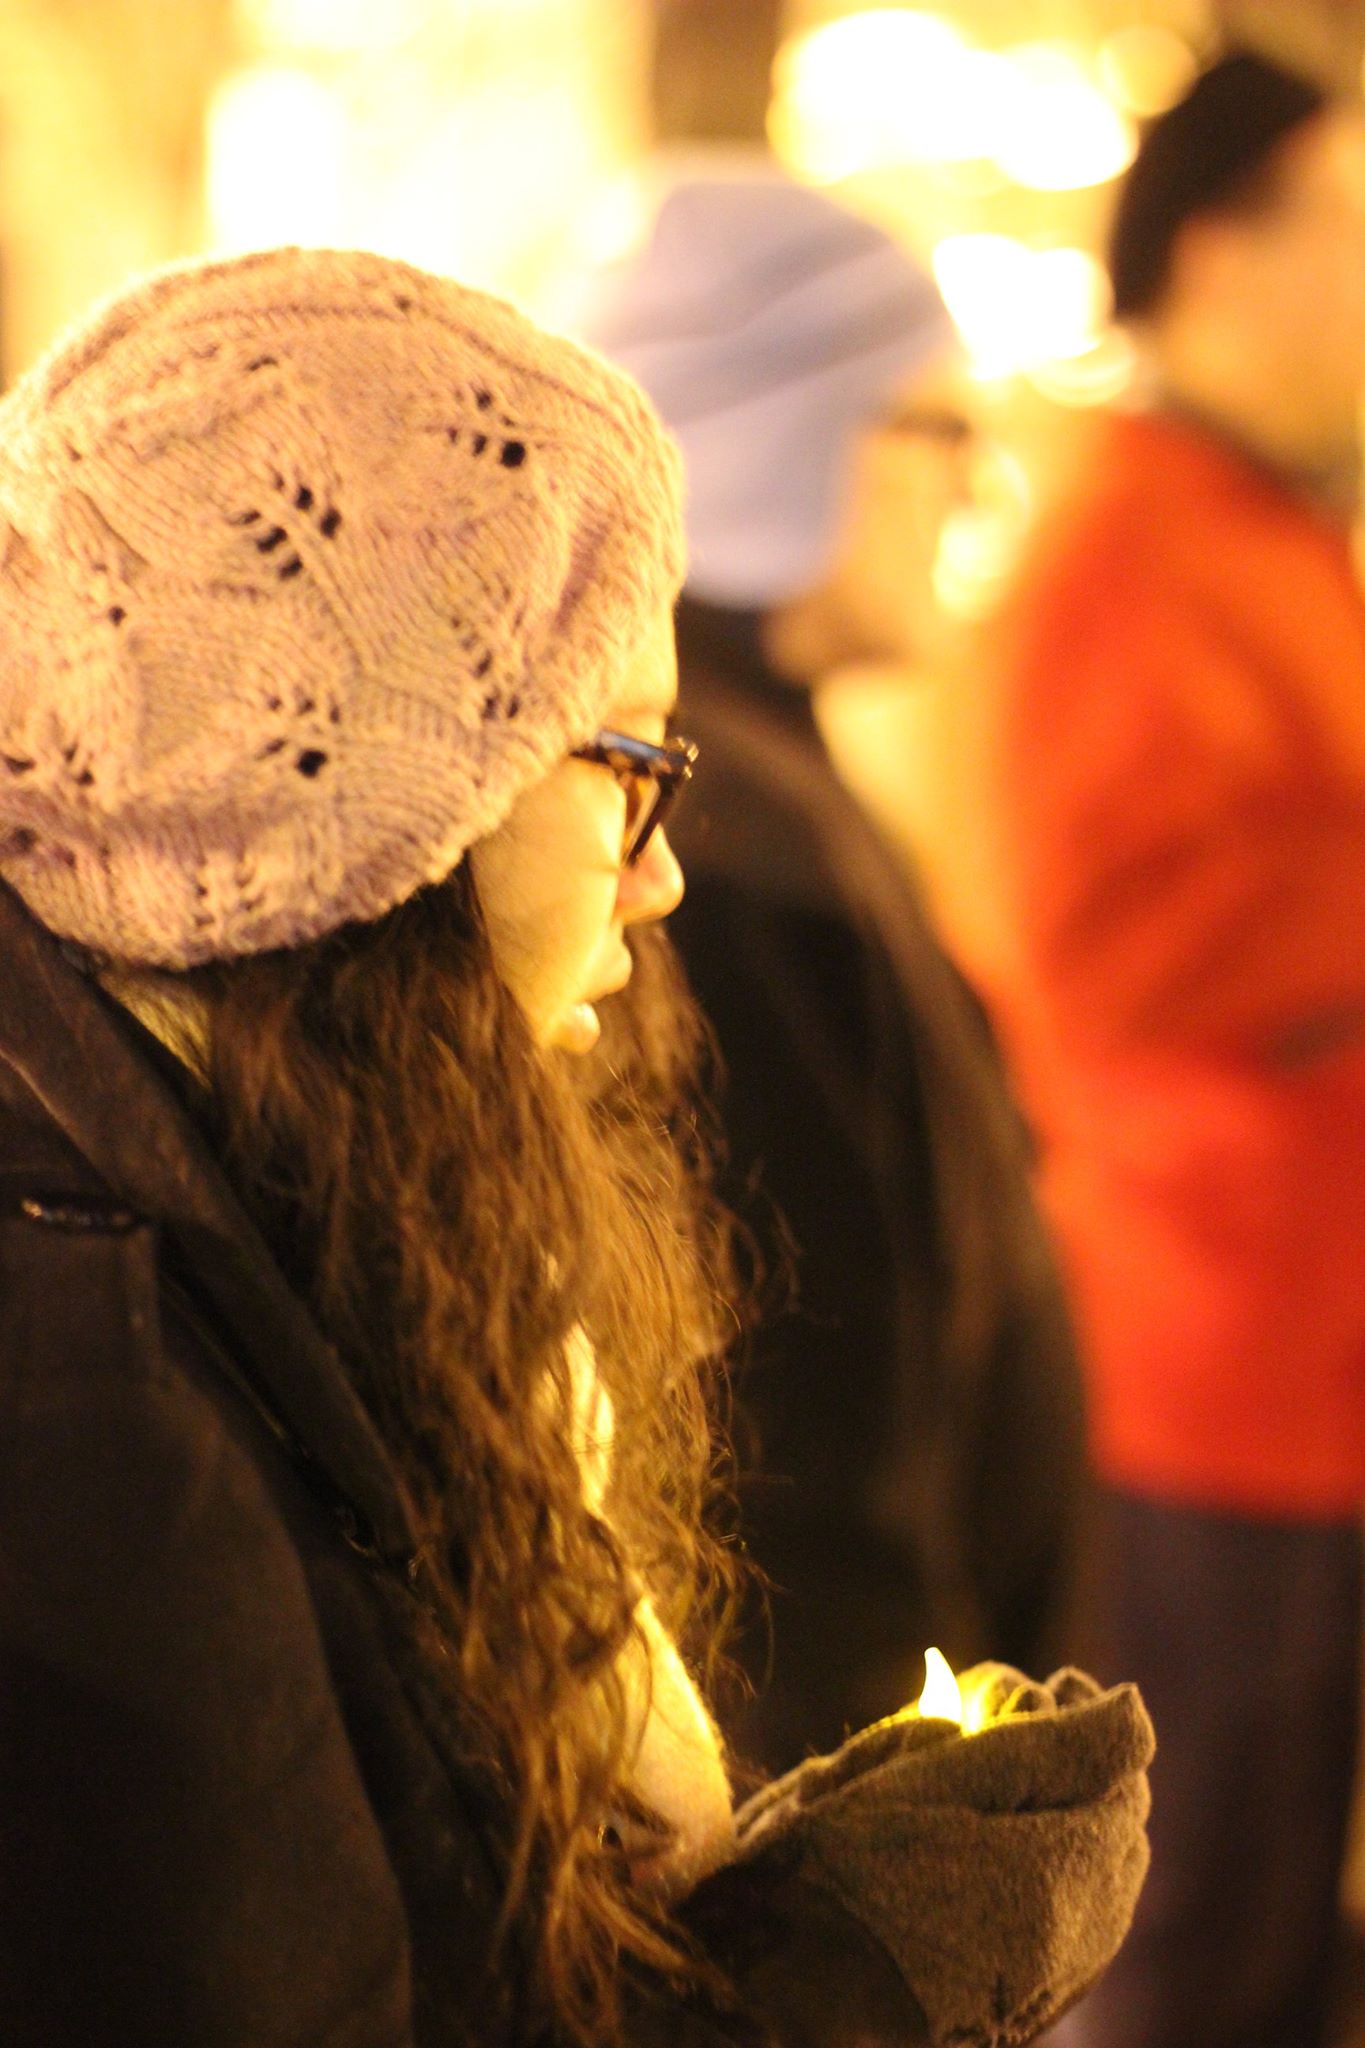 Me at a Candle Lighting Vigil for Kenneth Chamberlain Sr. in 2014.